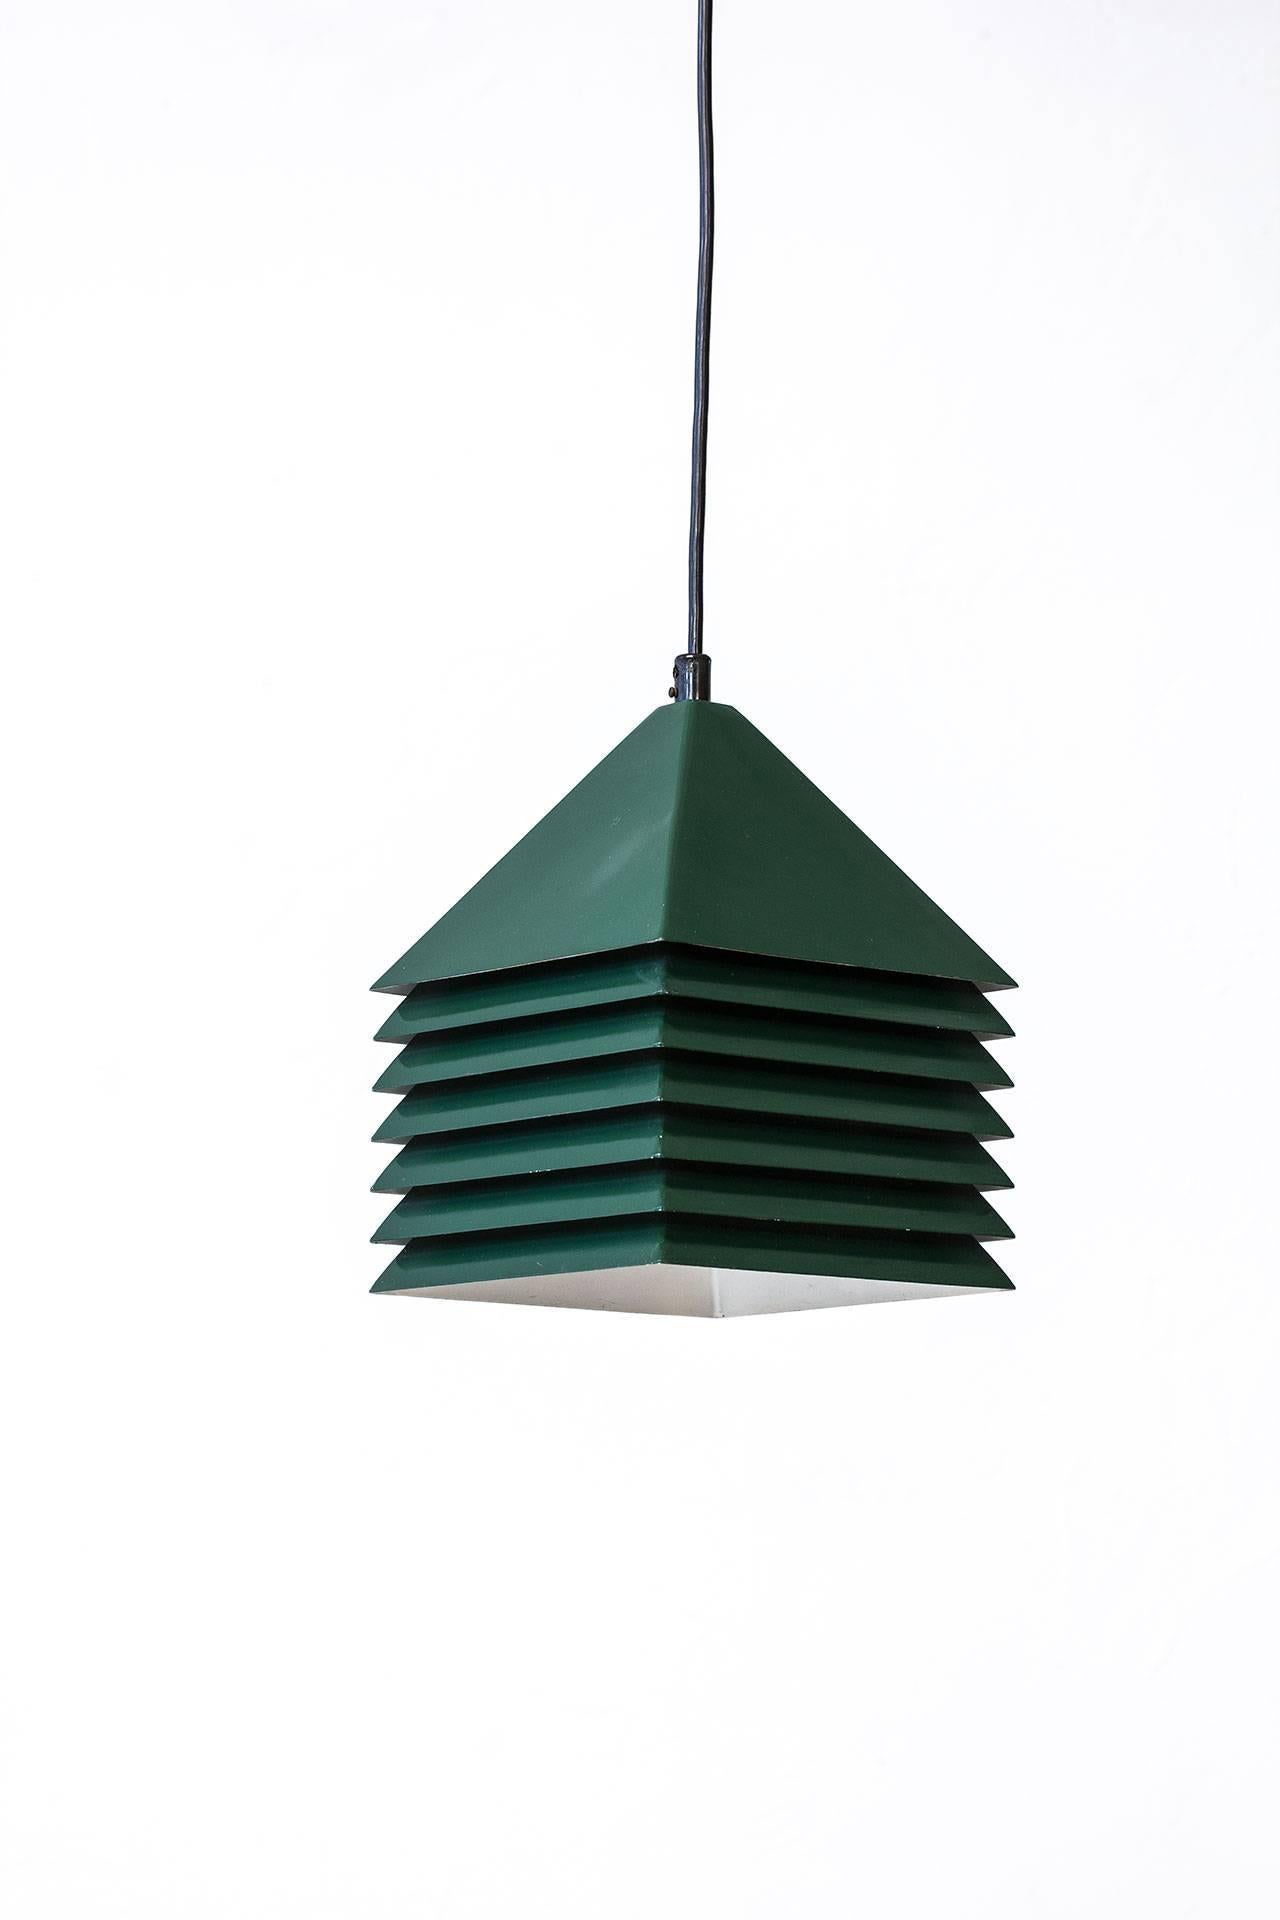 Small pendant lamp in forest
green lacquered metal. Made
by  Hans-Agne Jakobsson in
Sweden   during   the   1960s.
New electricity.